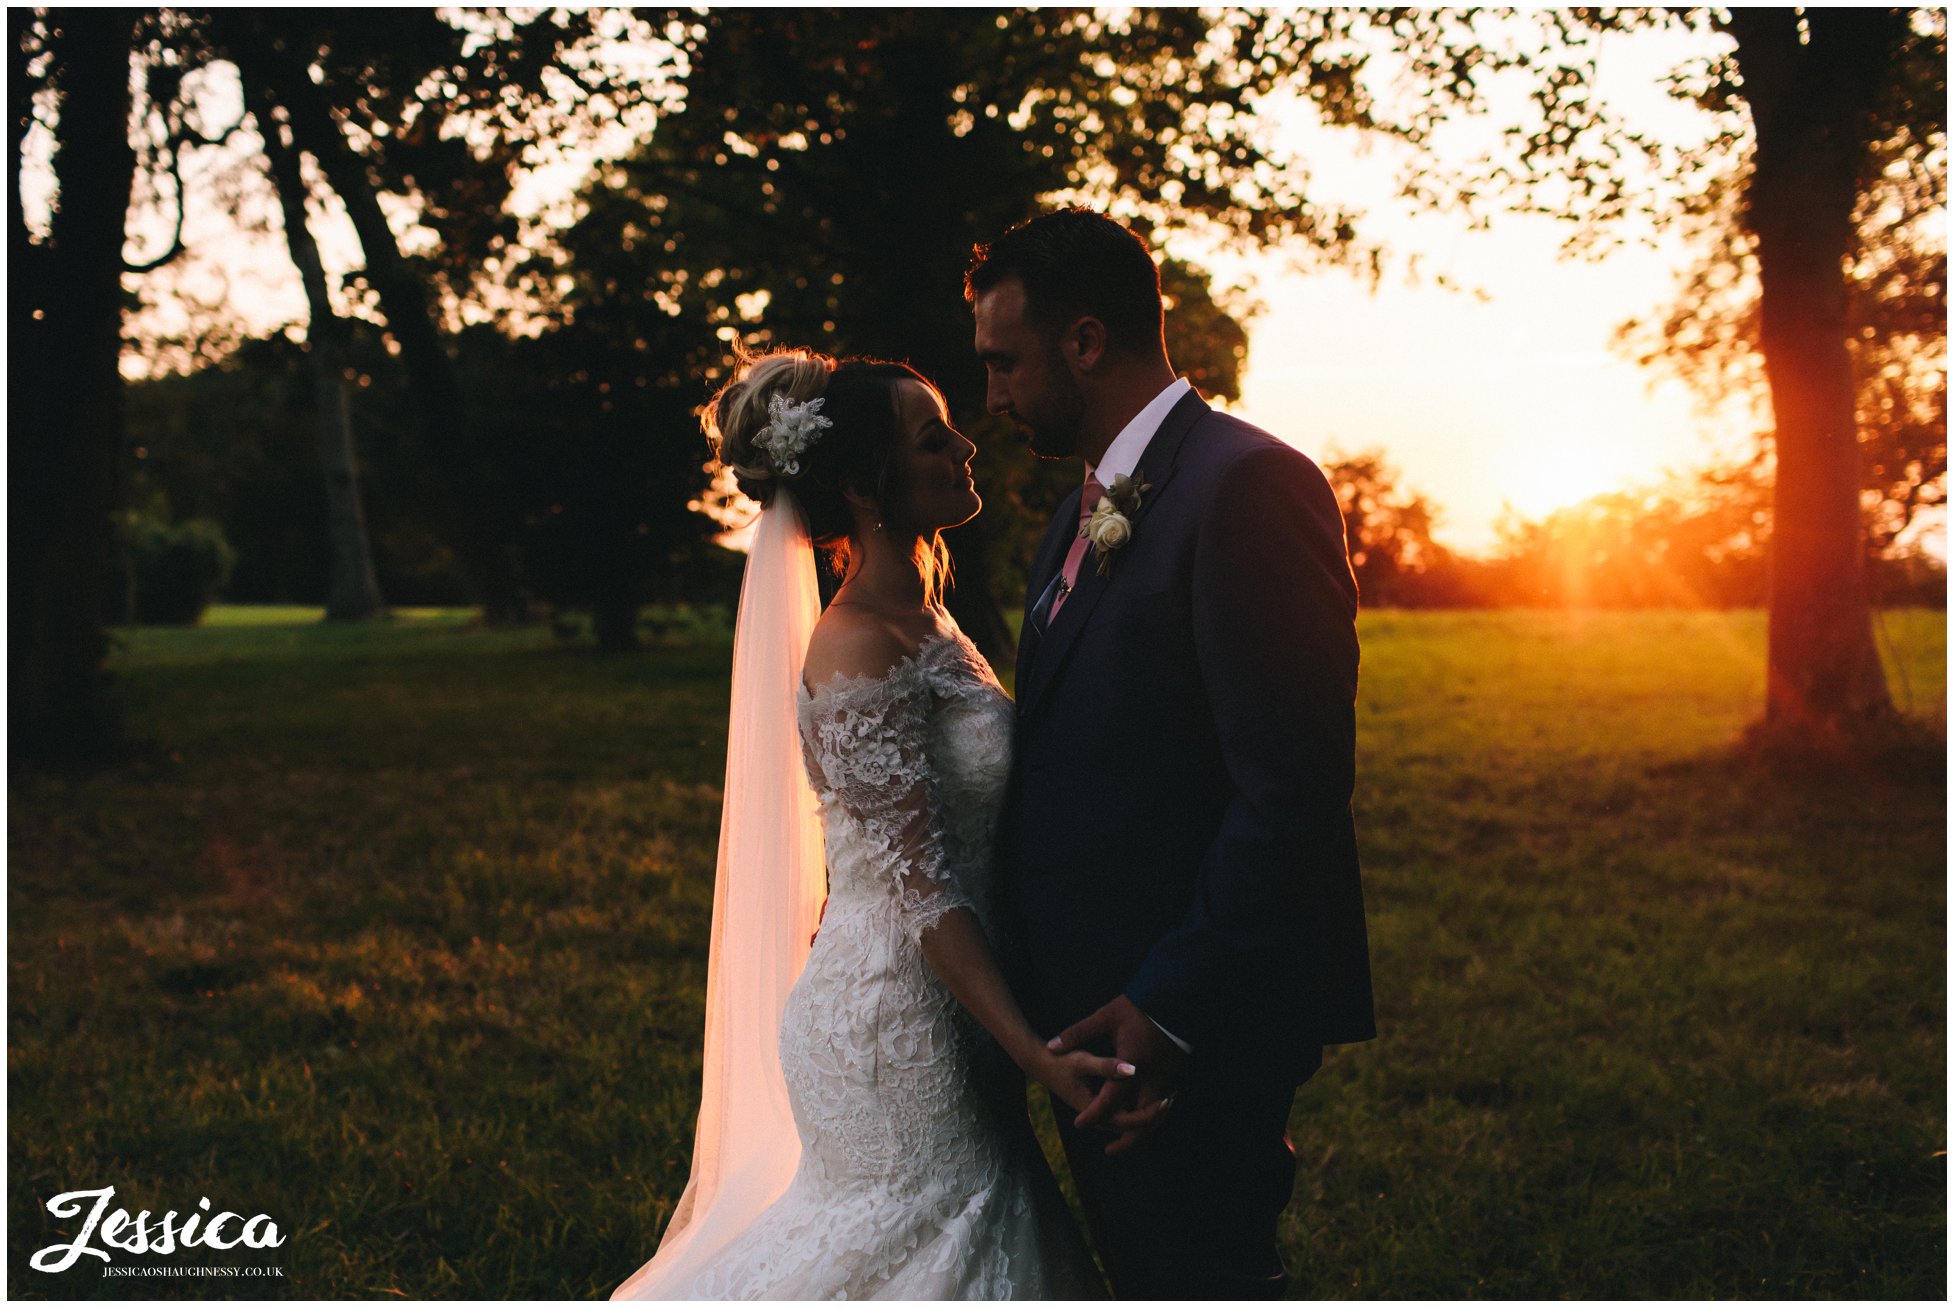 the couple hold hands as the sun goes down